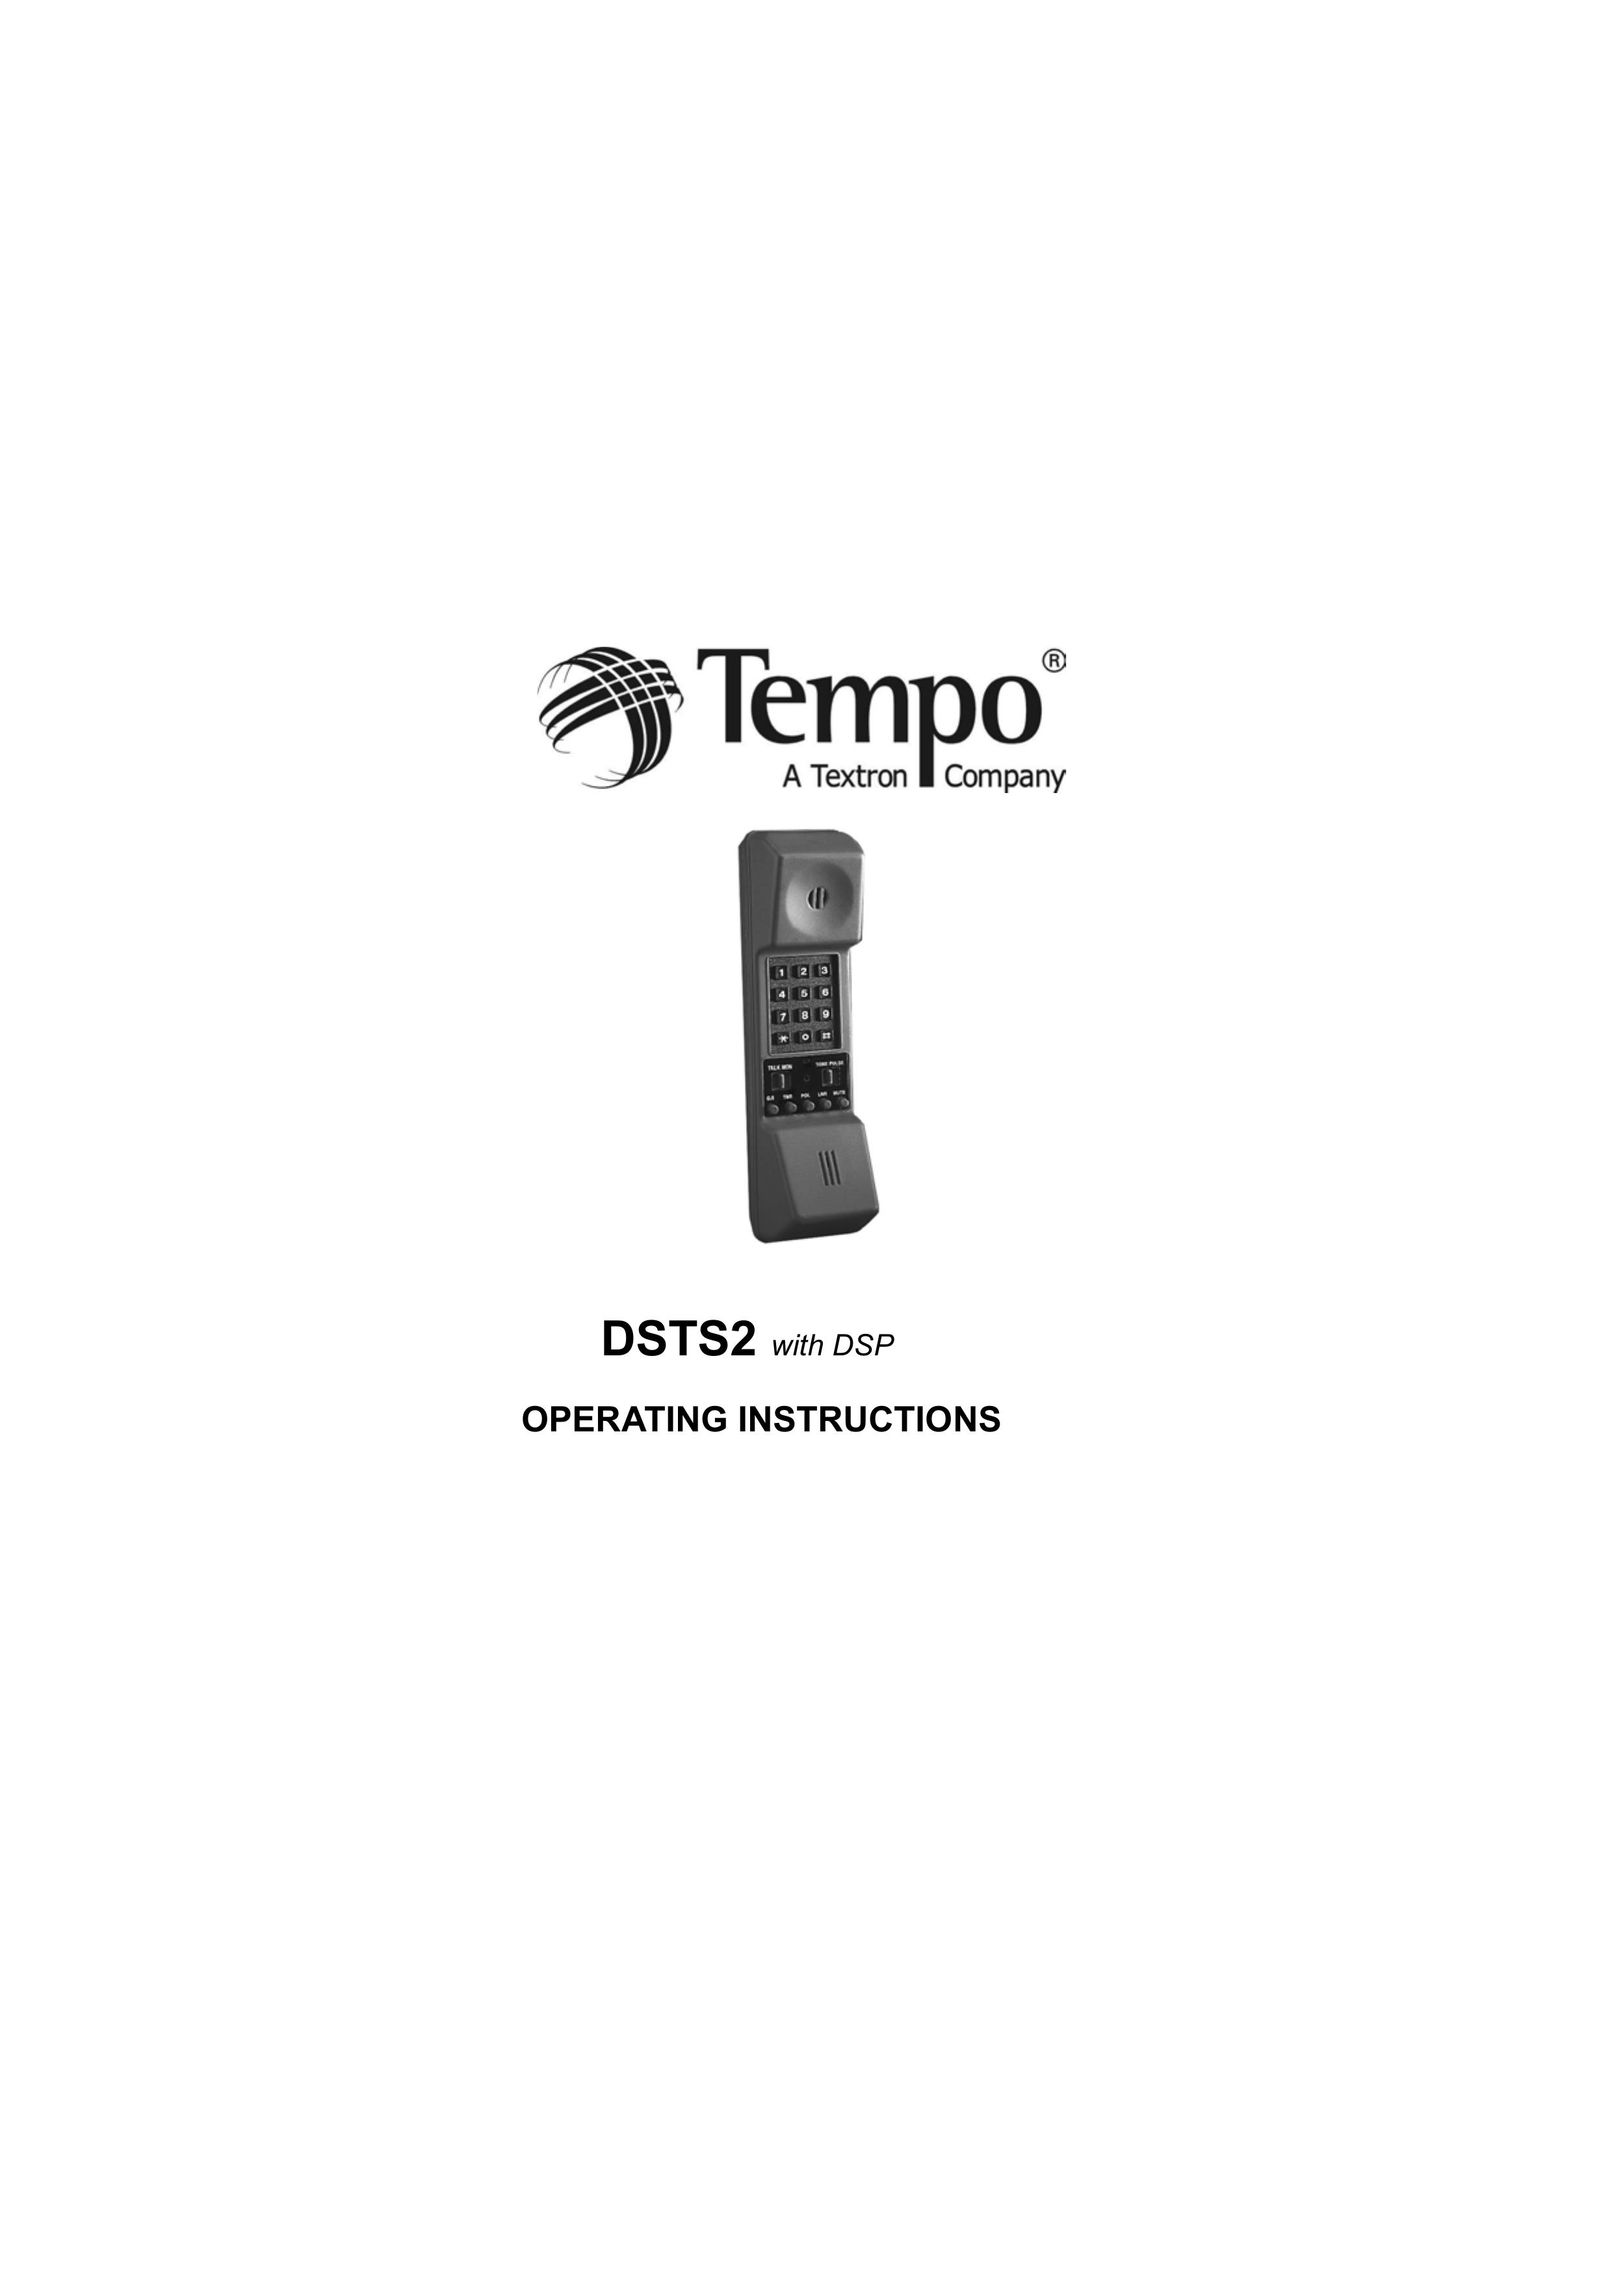 Tempo DSTS2 Telephone User Manual